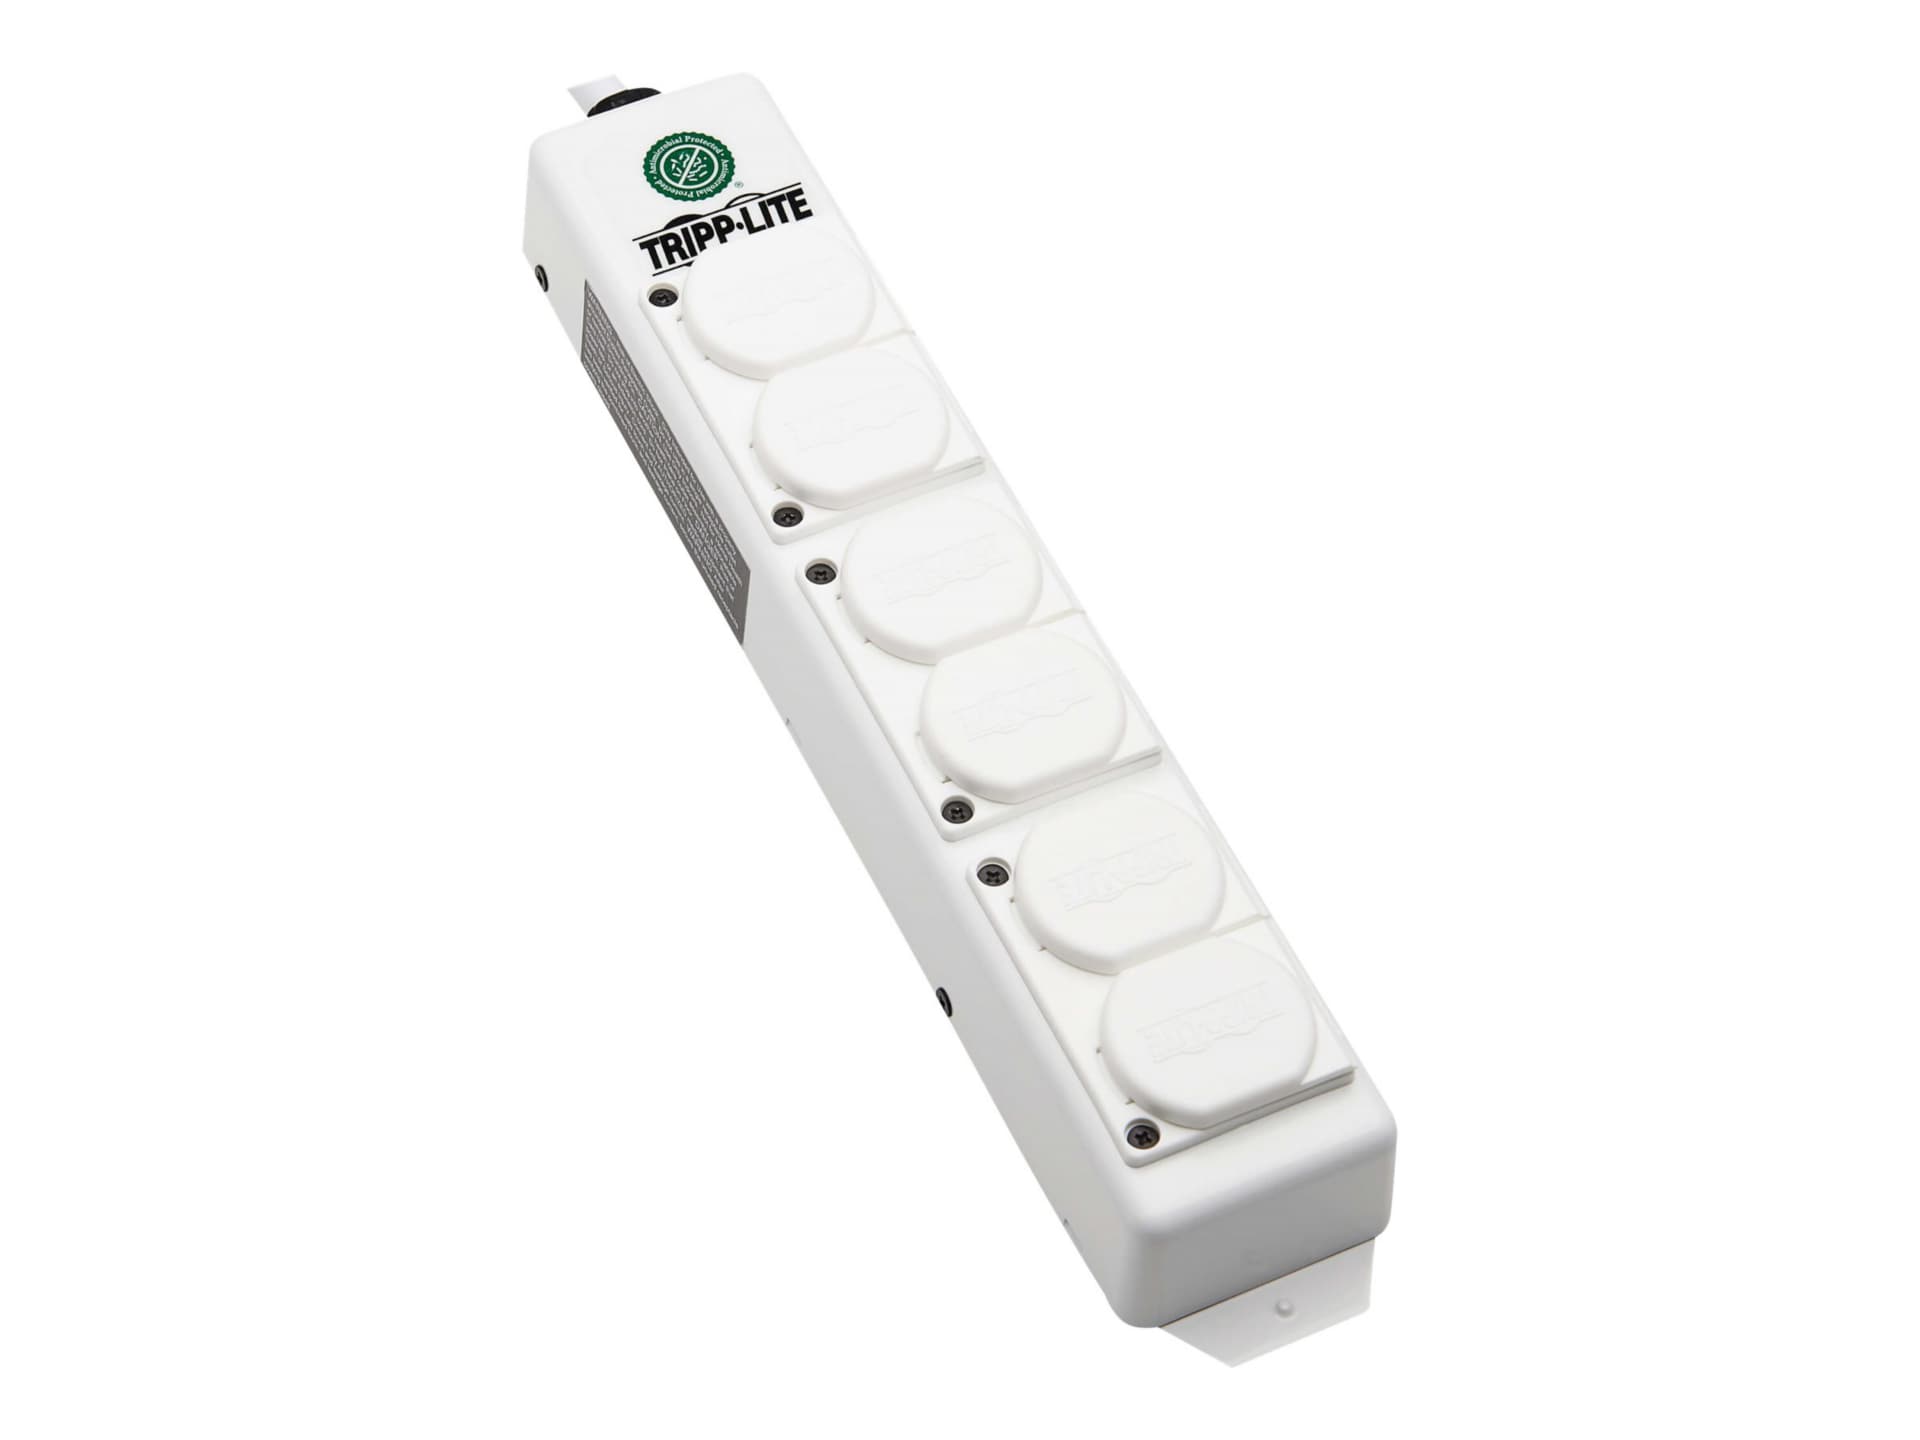 Tripp Lite Safe-IT UL 2930 Medical-Grade Power Strip for Patient Care Vicinity, 6 Hospital-Grade Outlets, Safety Covers,